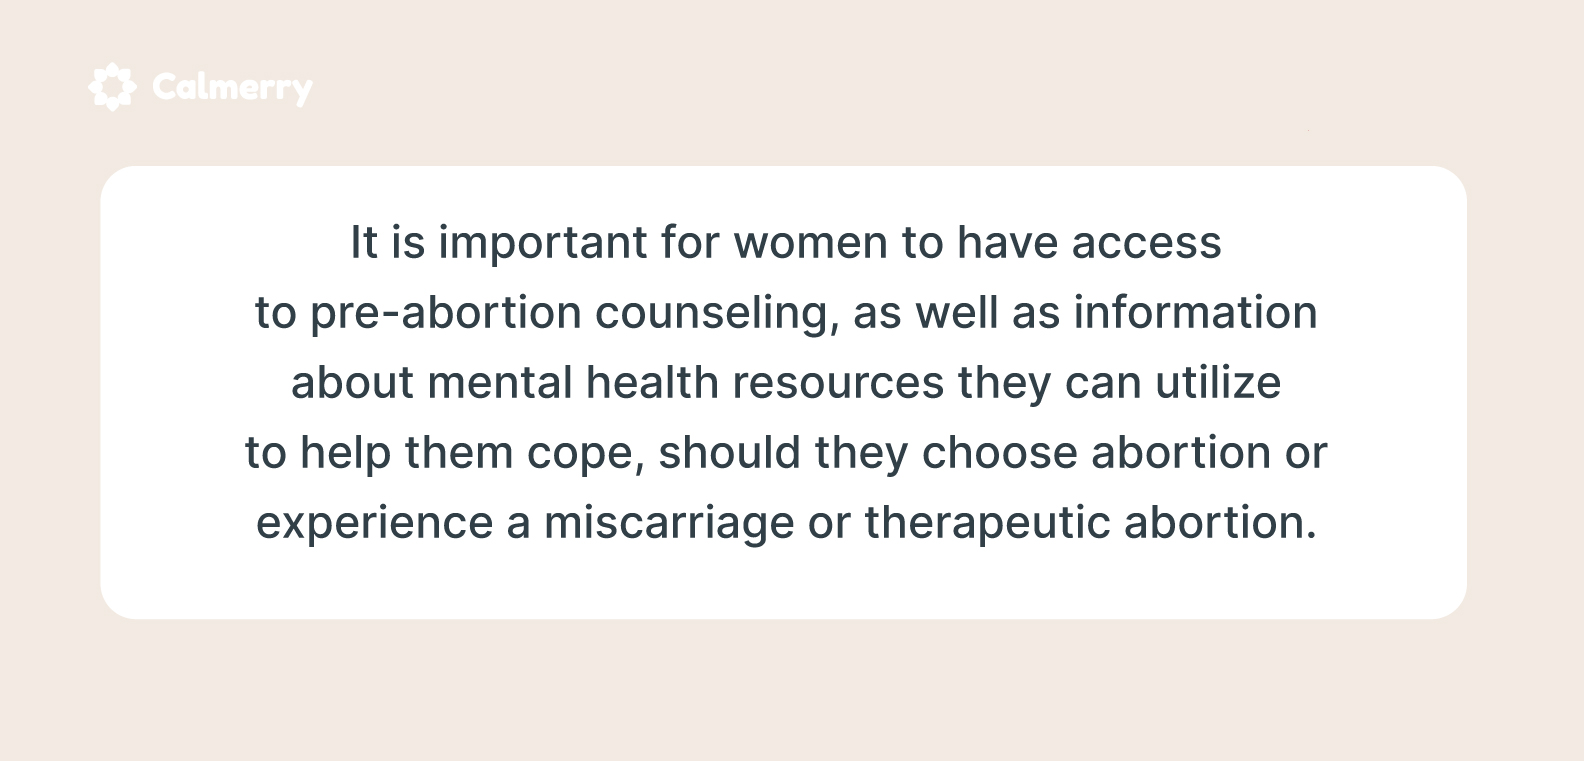 It is important for women to have access to pre-abortion counseling